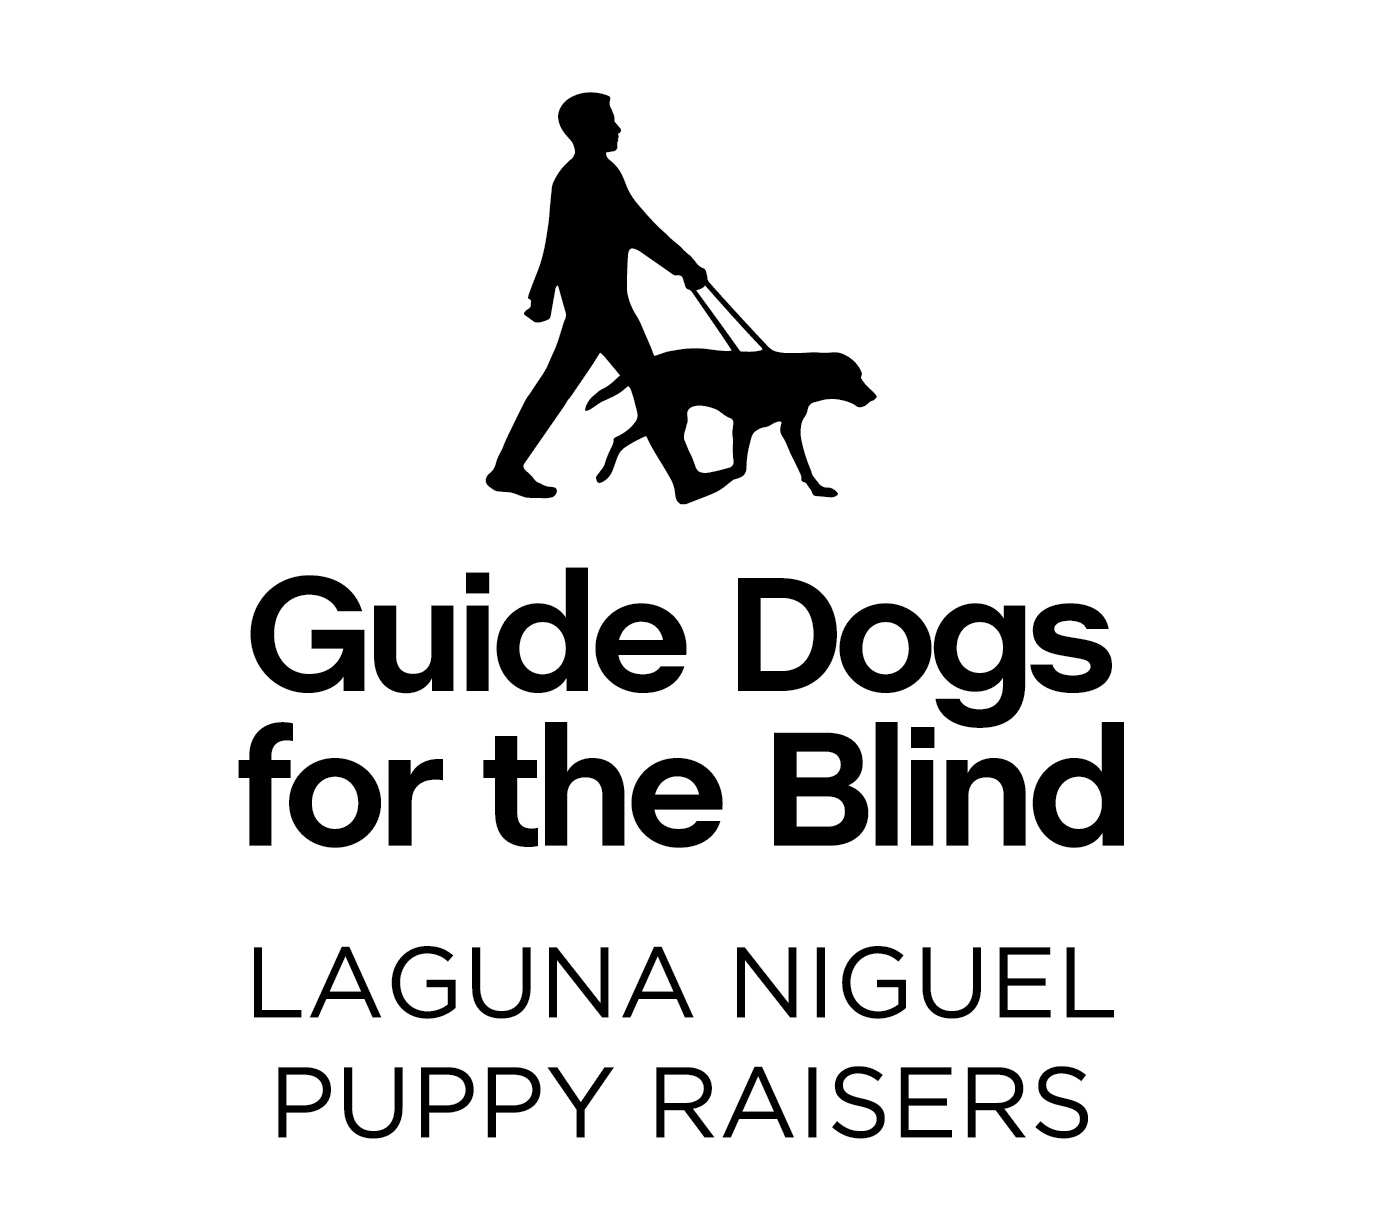 Guide Dogs for the Blind - Laguna Niguel Puppy Raisers